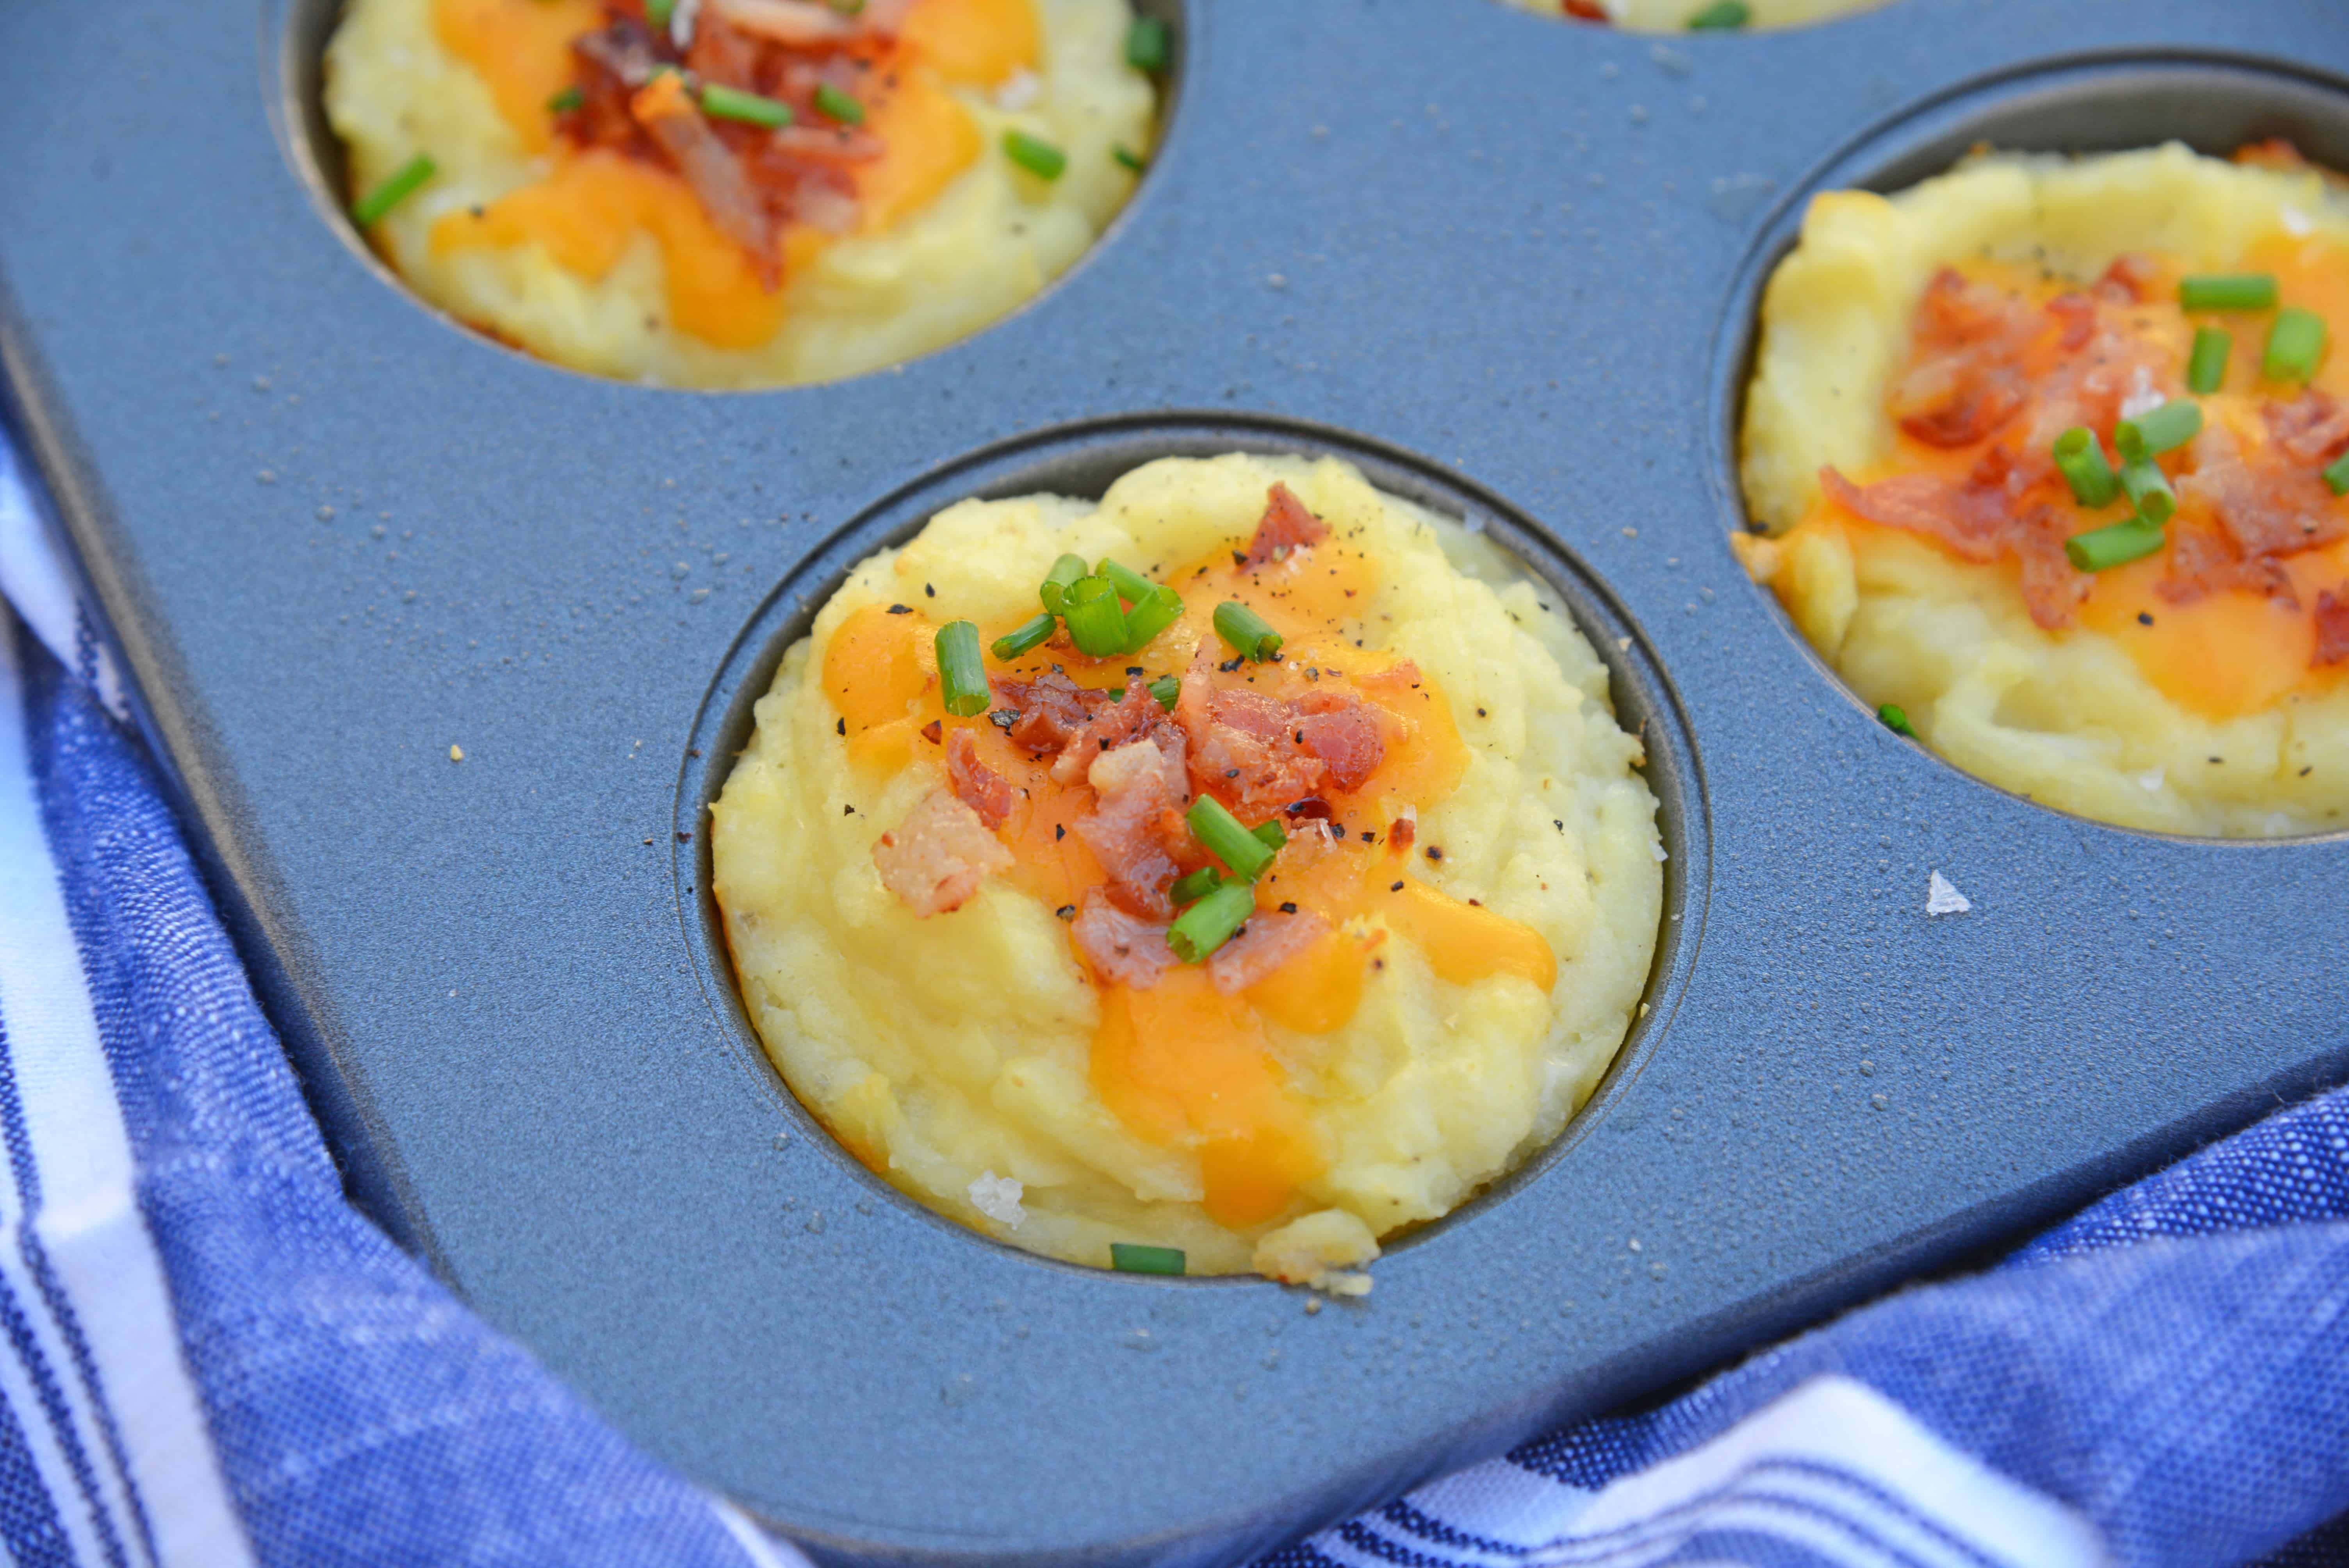 Loaded Mashed Potato Cups are the best way to use leftover mashed potatoes. Mixed with cheese, eggs and a few other ingredients, you load them into a muffin tin and poof, you've got finger food mashed potatoes! #mashedpotatoes #mashedpotatocups www.savoryexperiments.com 